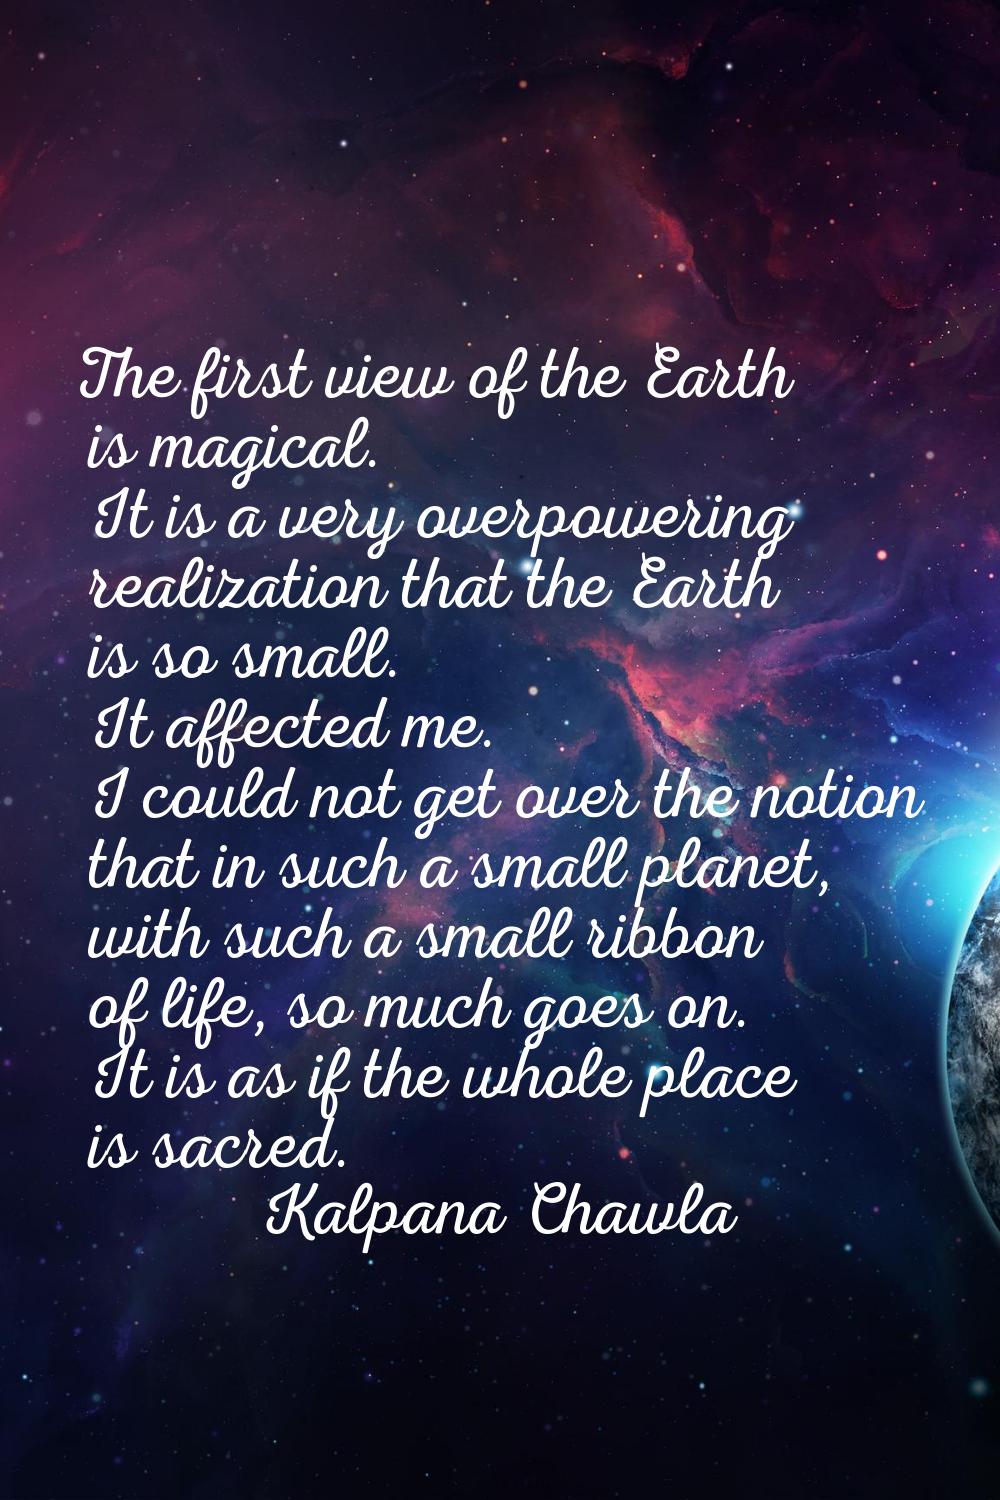 The first view of the Earth is magical. It is a very overpowering realization that the Earth is so 